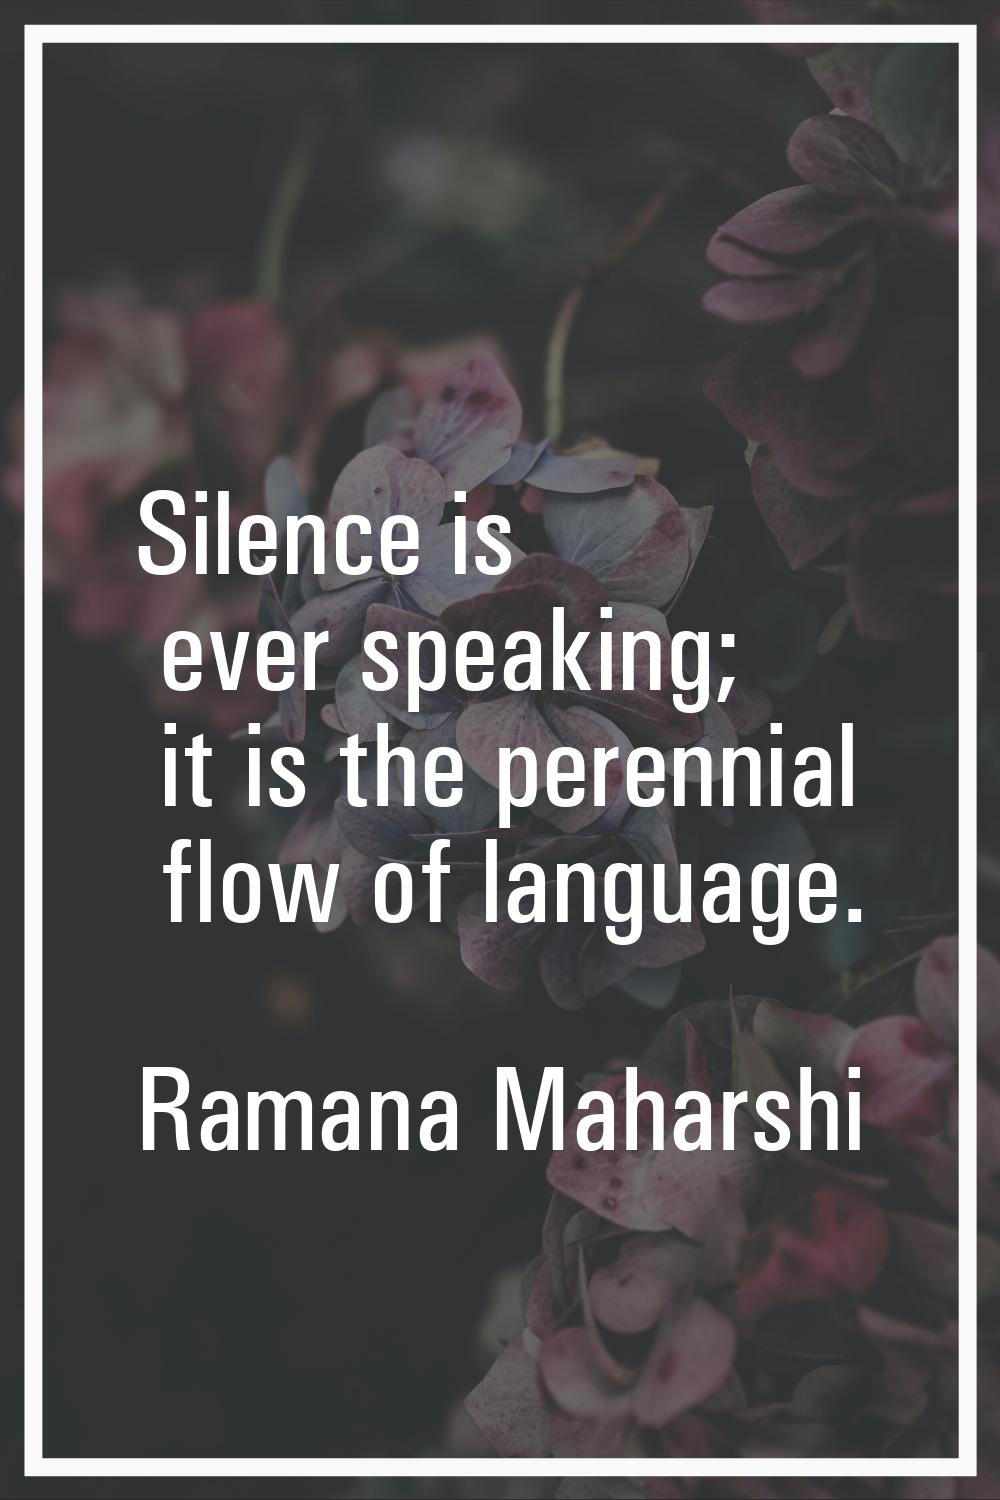 Silence is ever speaking; it is the perennial flow of language.